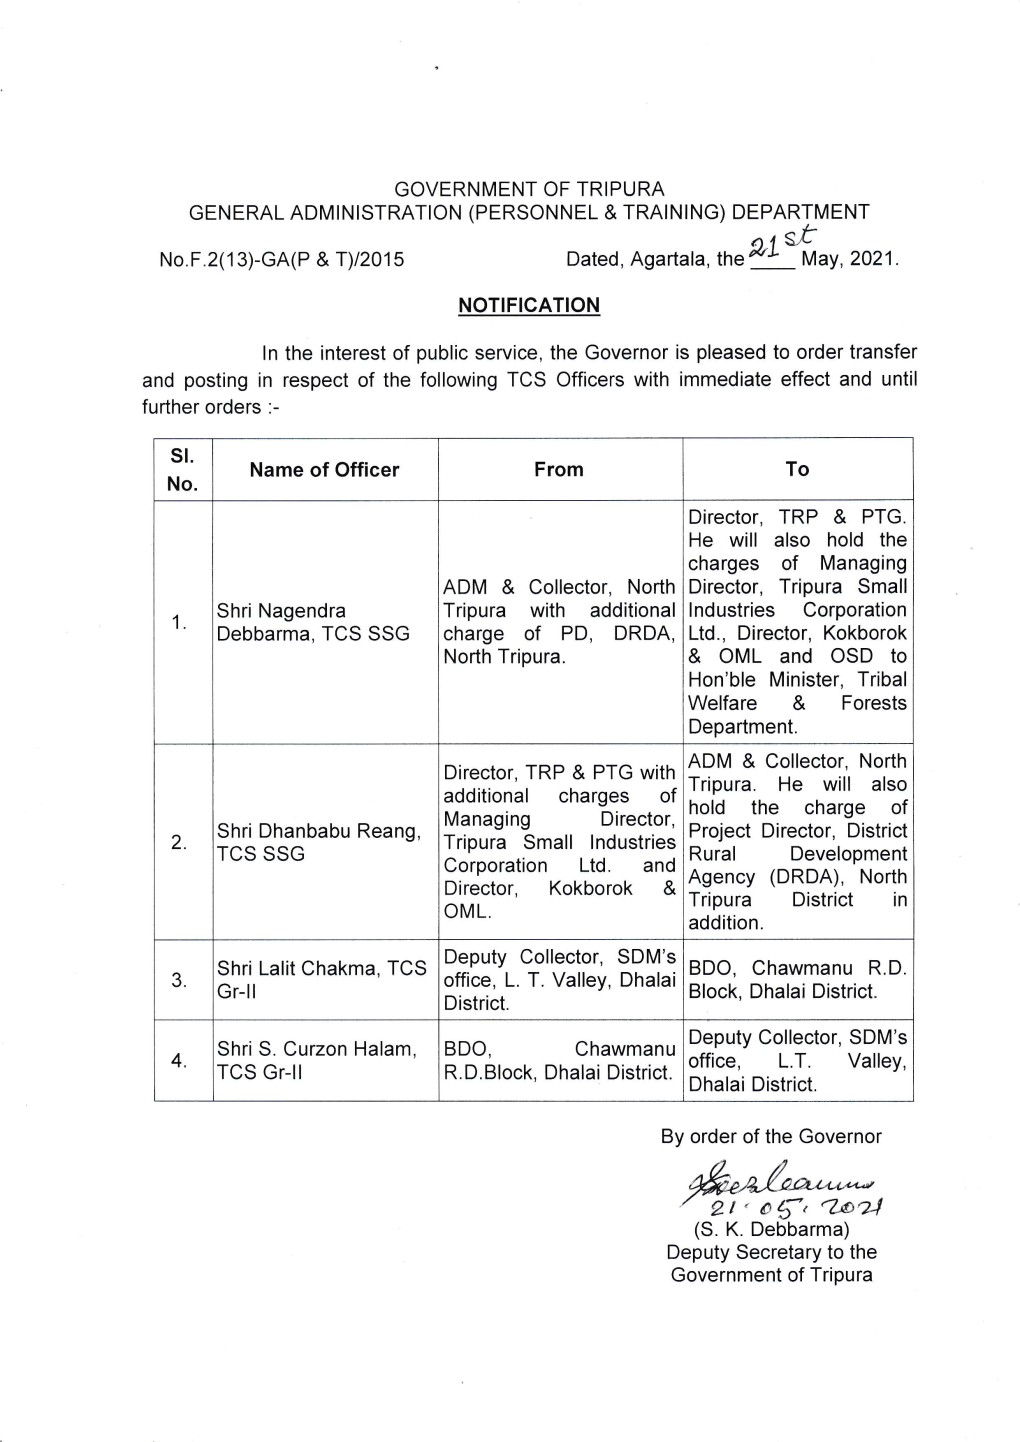 Dated, Agartala, Th"\-*Ay, 2021 . & OML and OSD to Managing Director